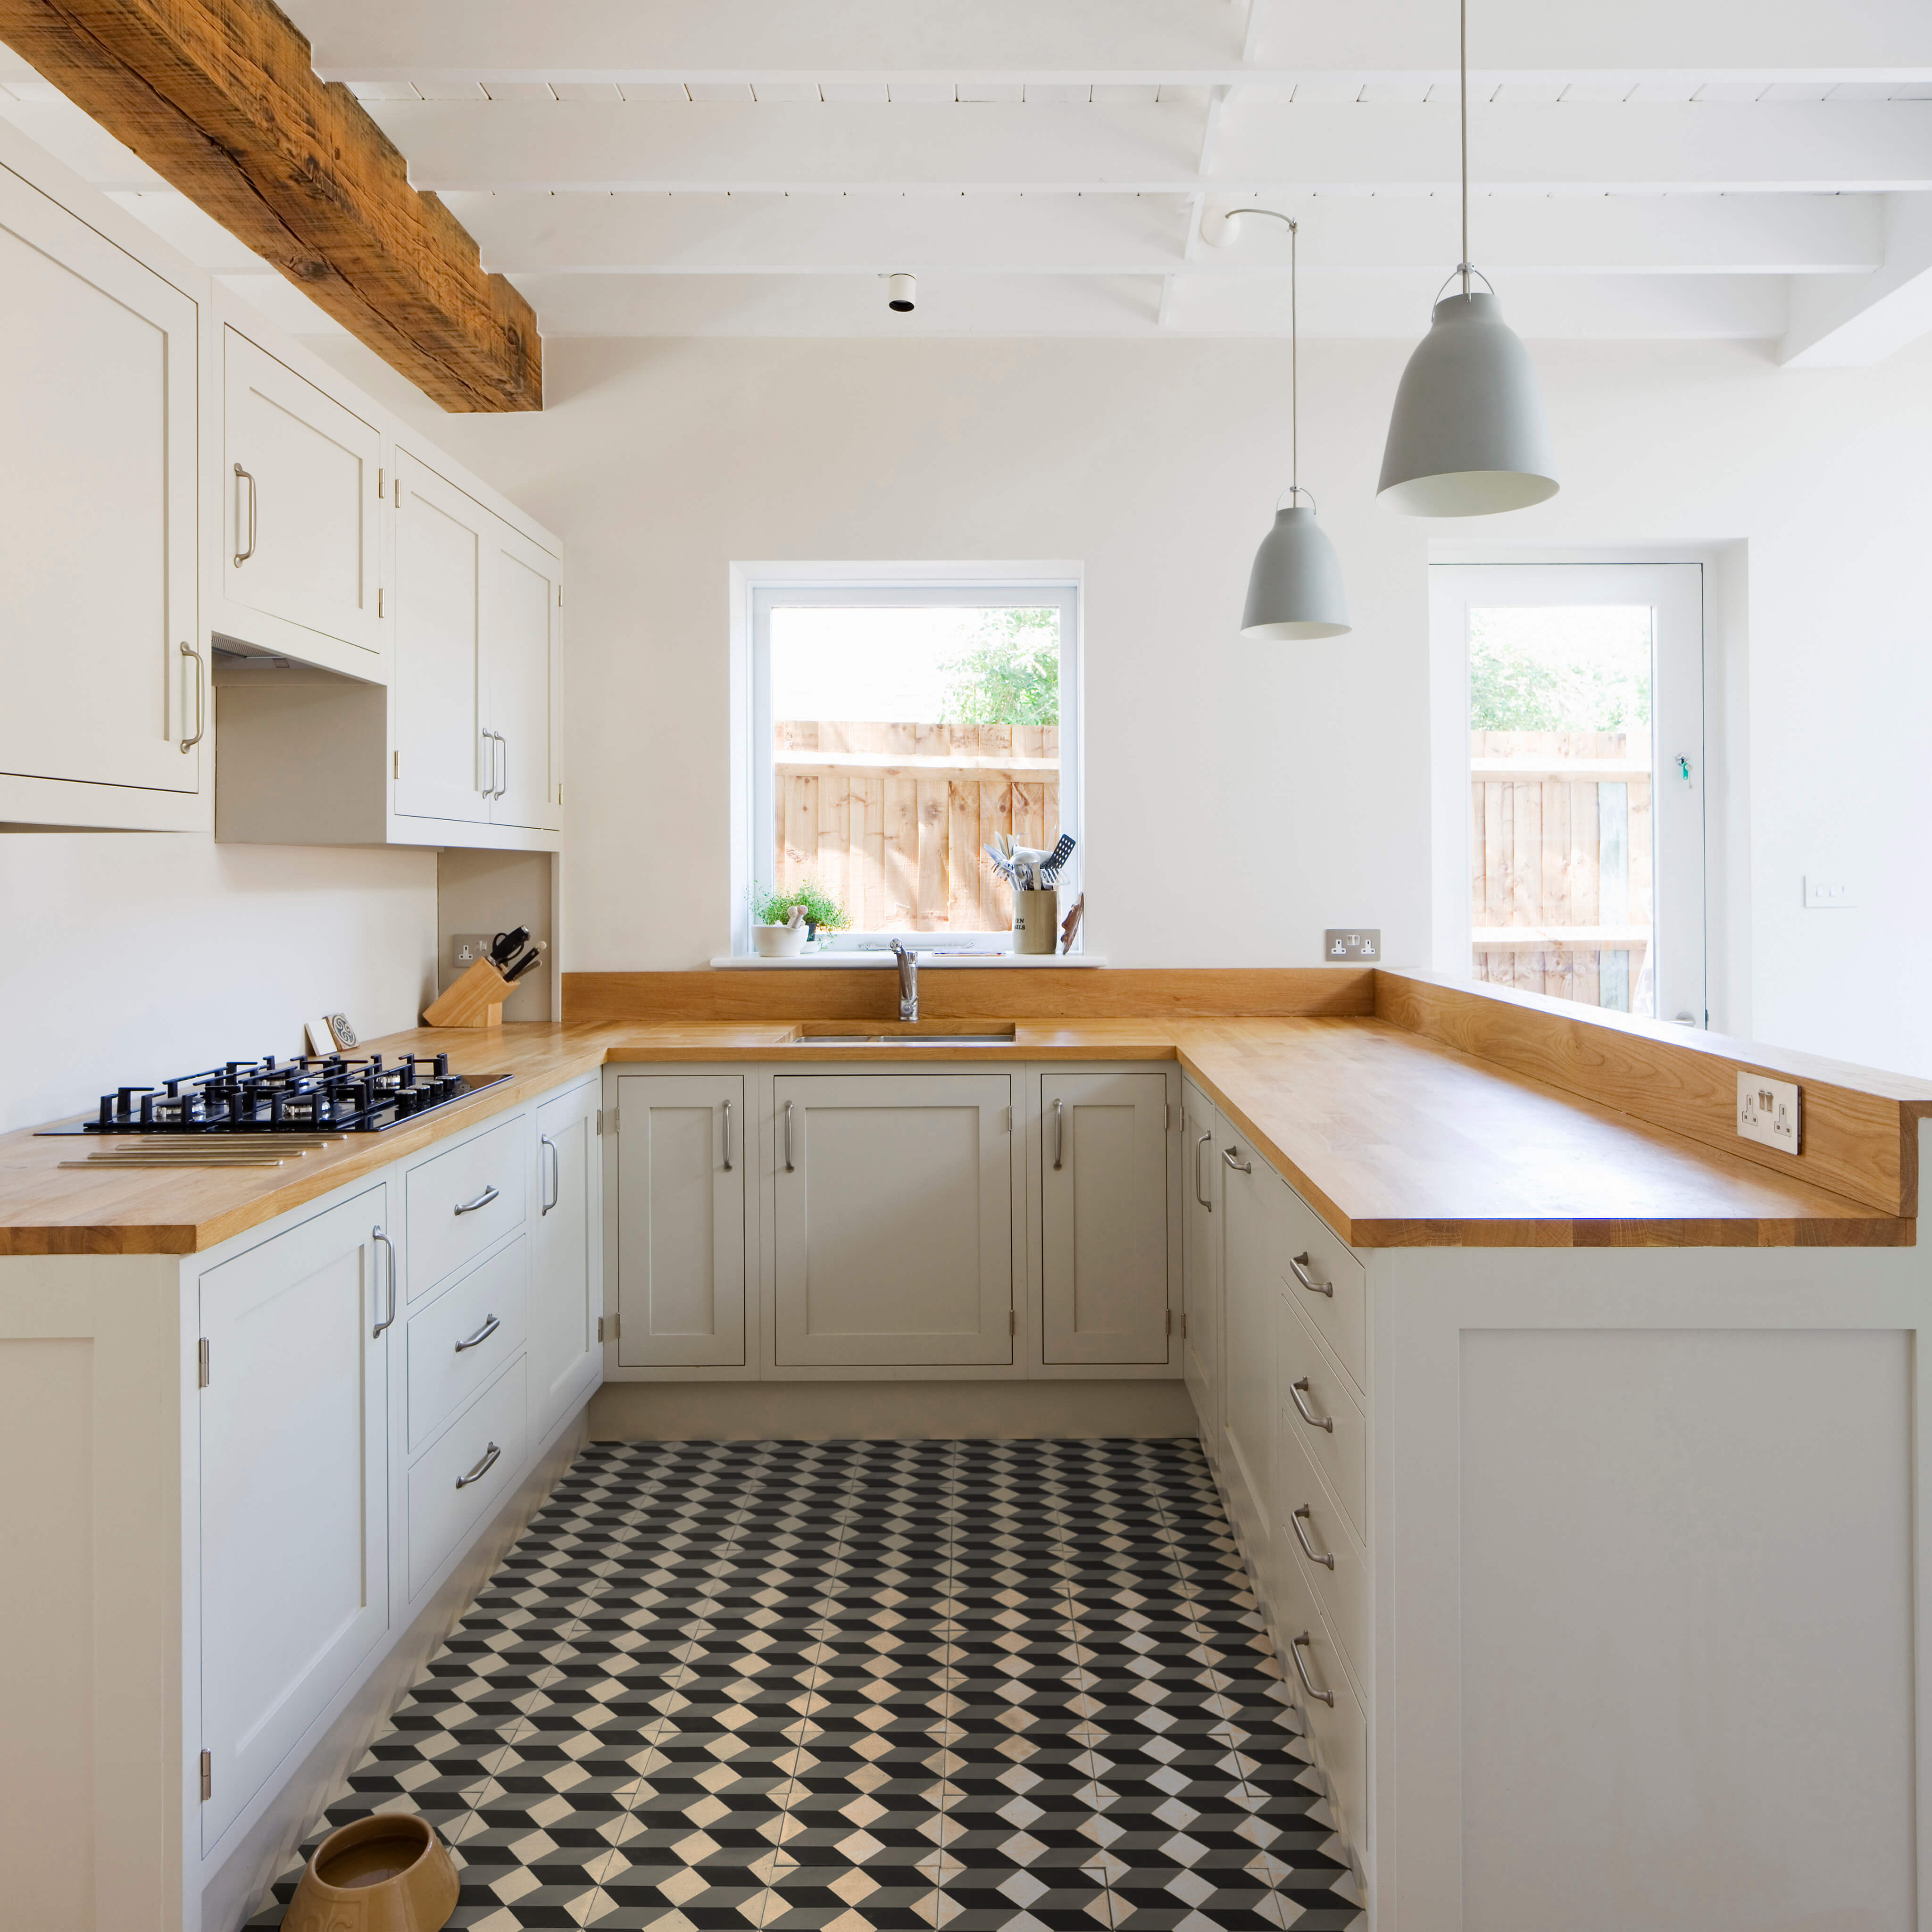 How to choose super beautiful kitchen tiles without spending your time